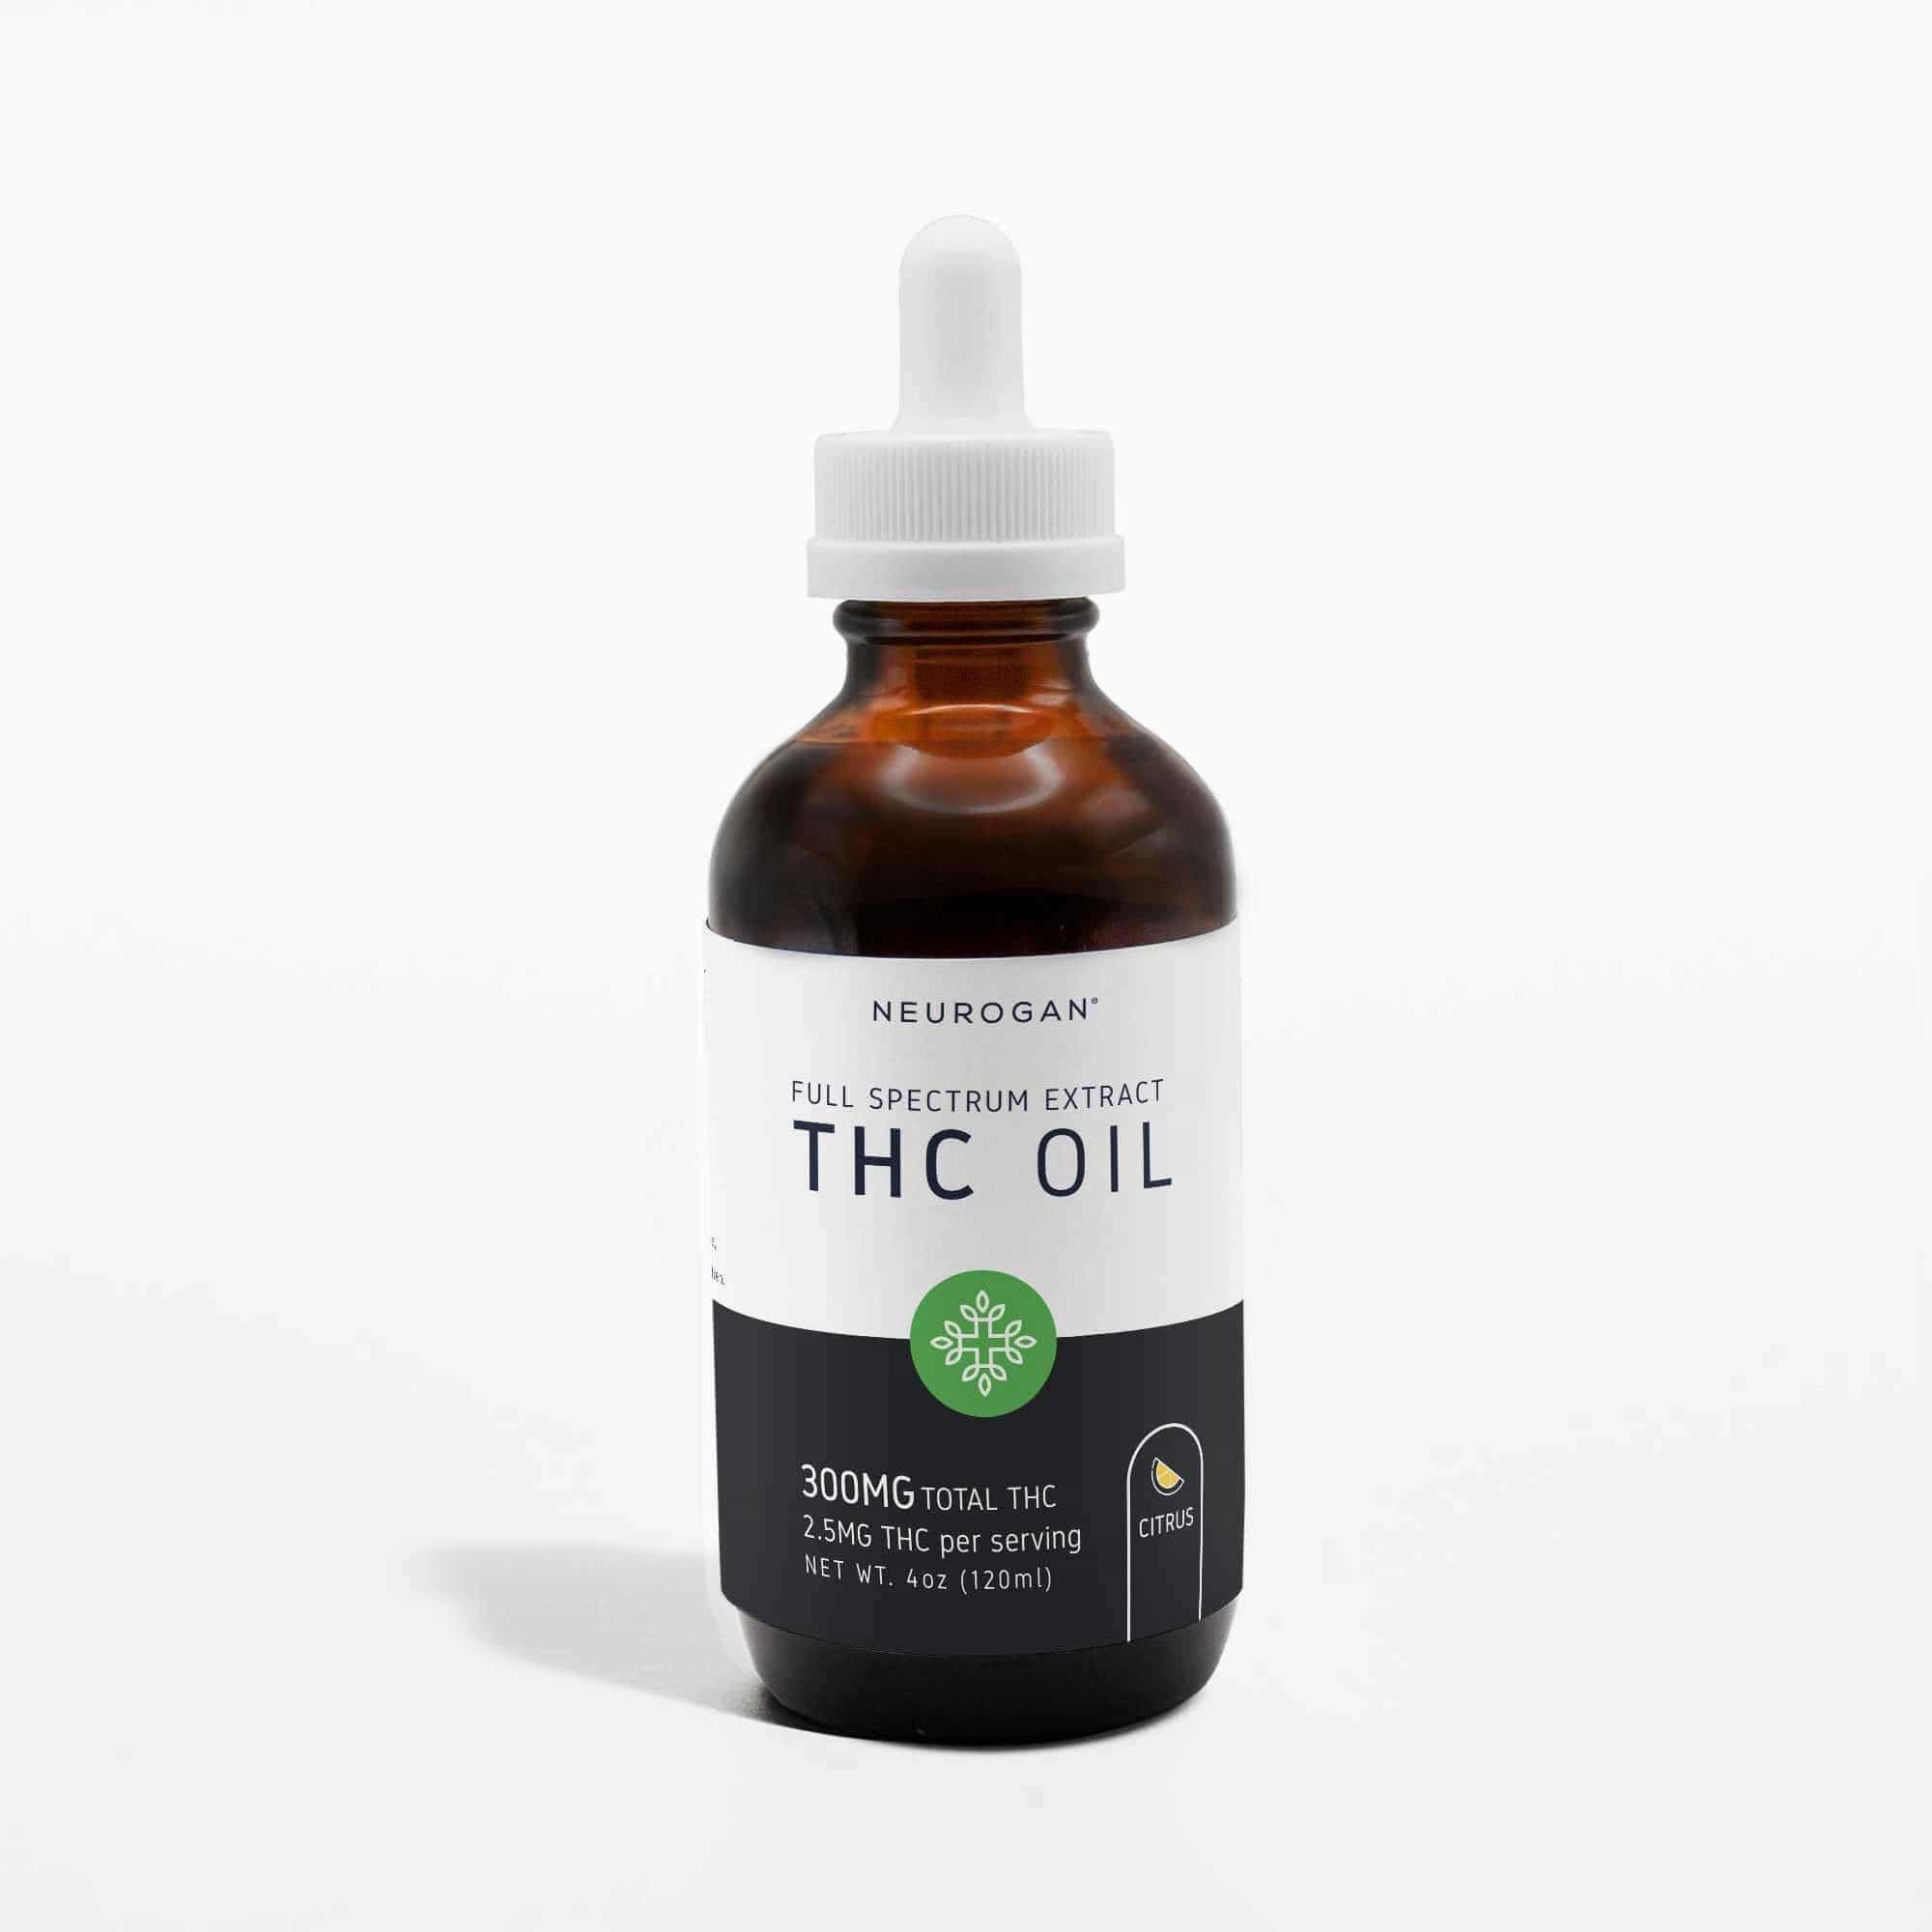 4oz Bottle of THC Oil - Citrus Flavor - Contains 300mg Total THC - Full Spectrum Extract